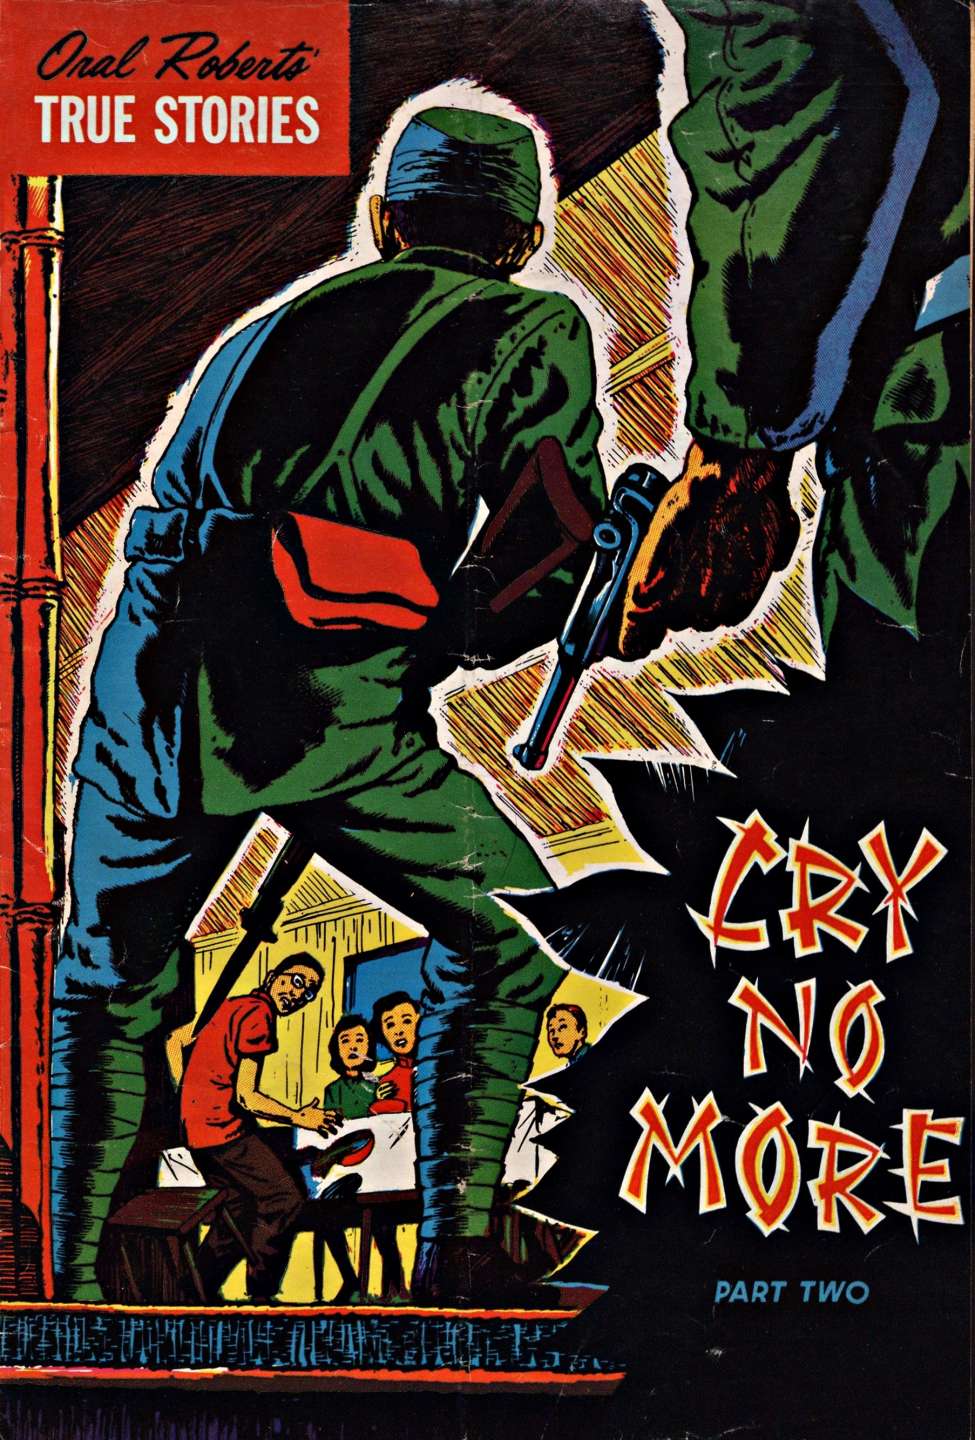 Book Cover For Oral Roberts' True Stories 118 - Cry No More p2